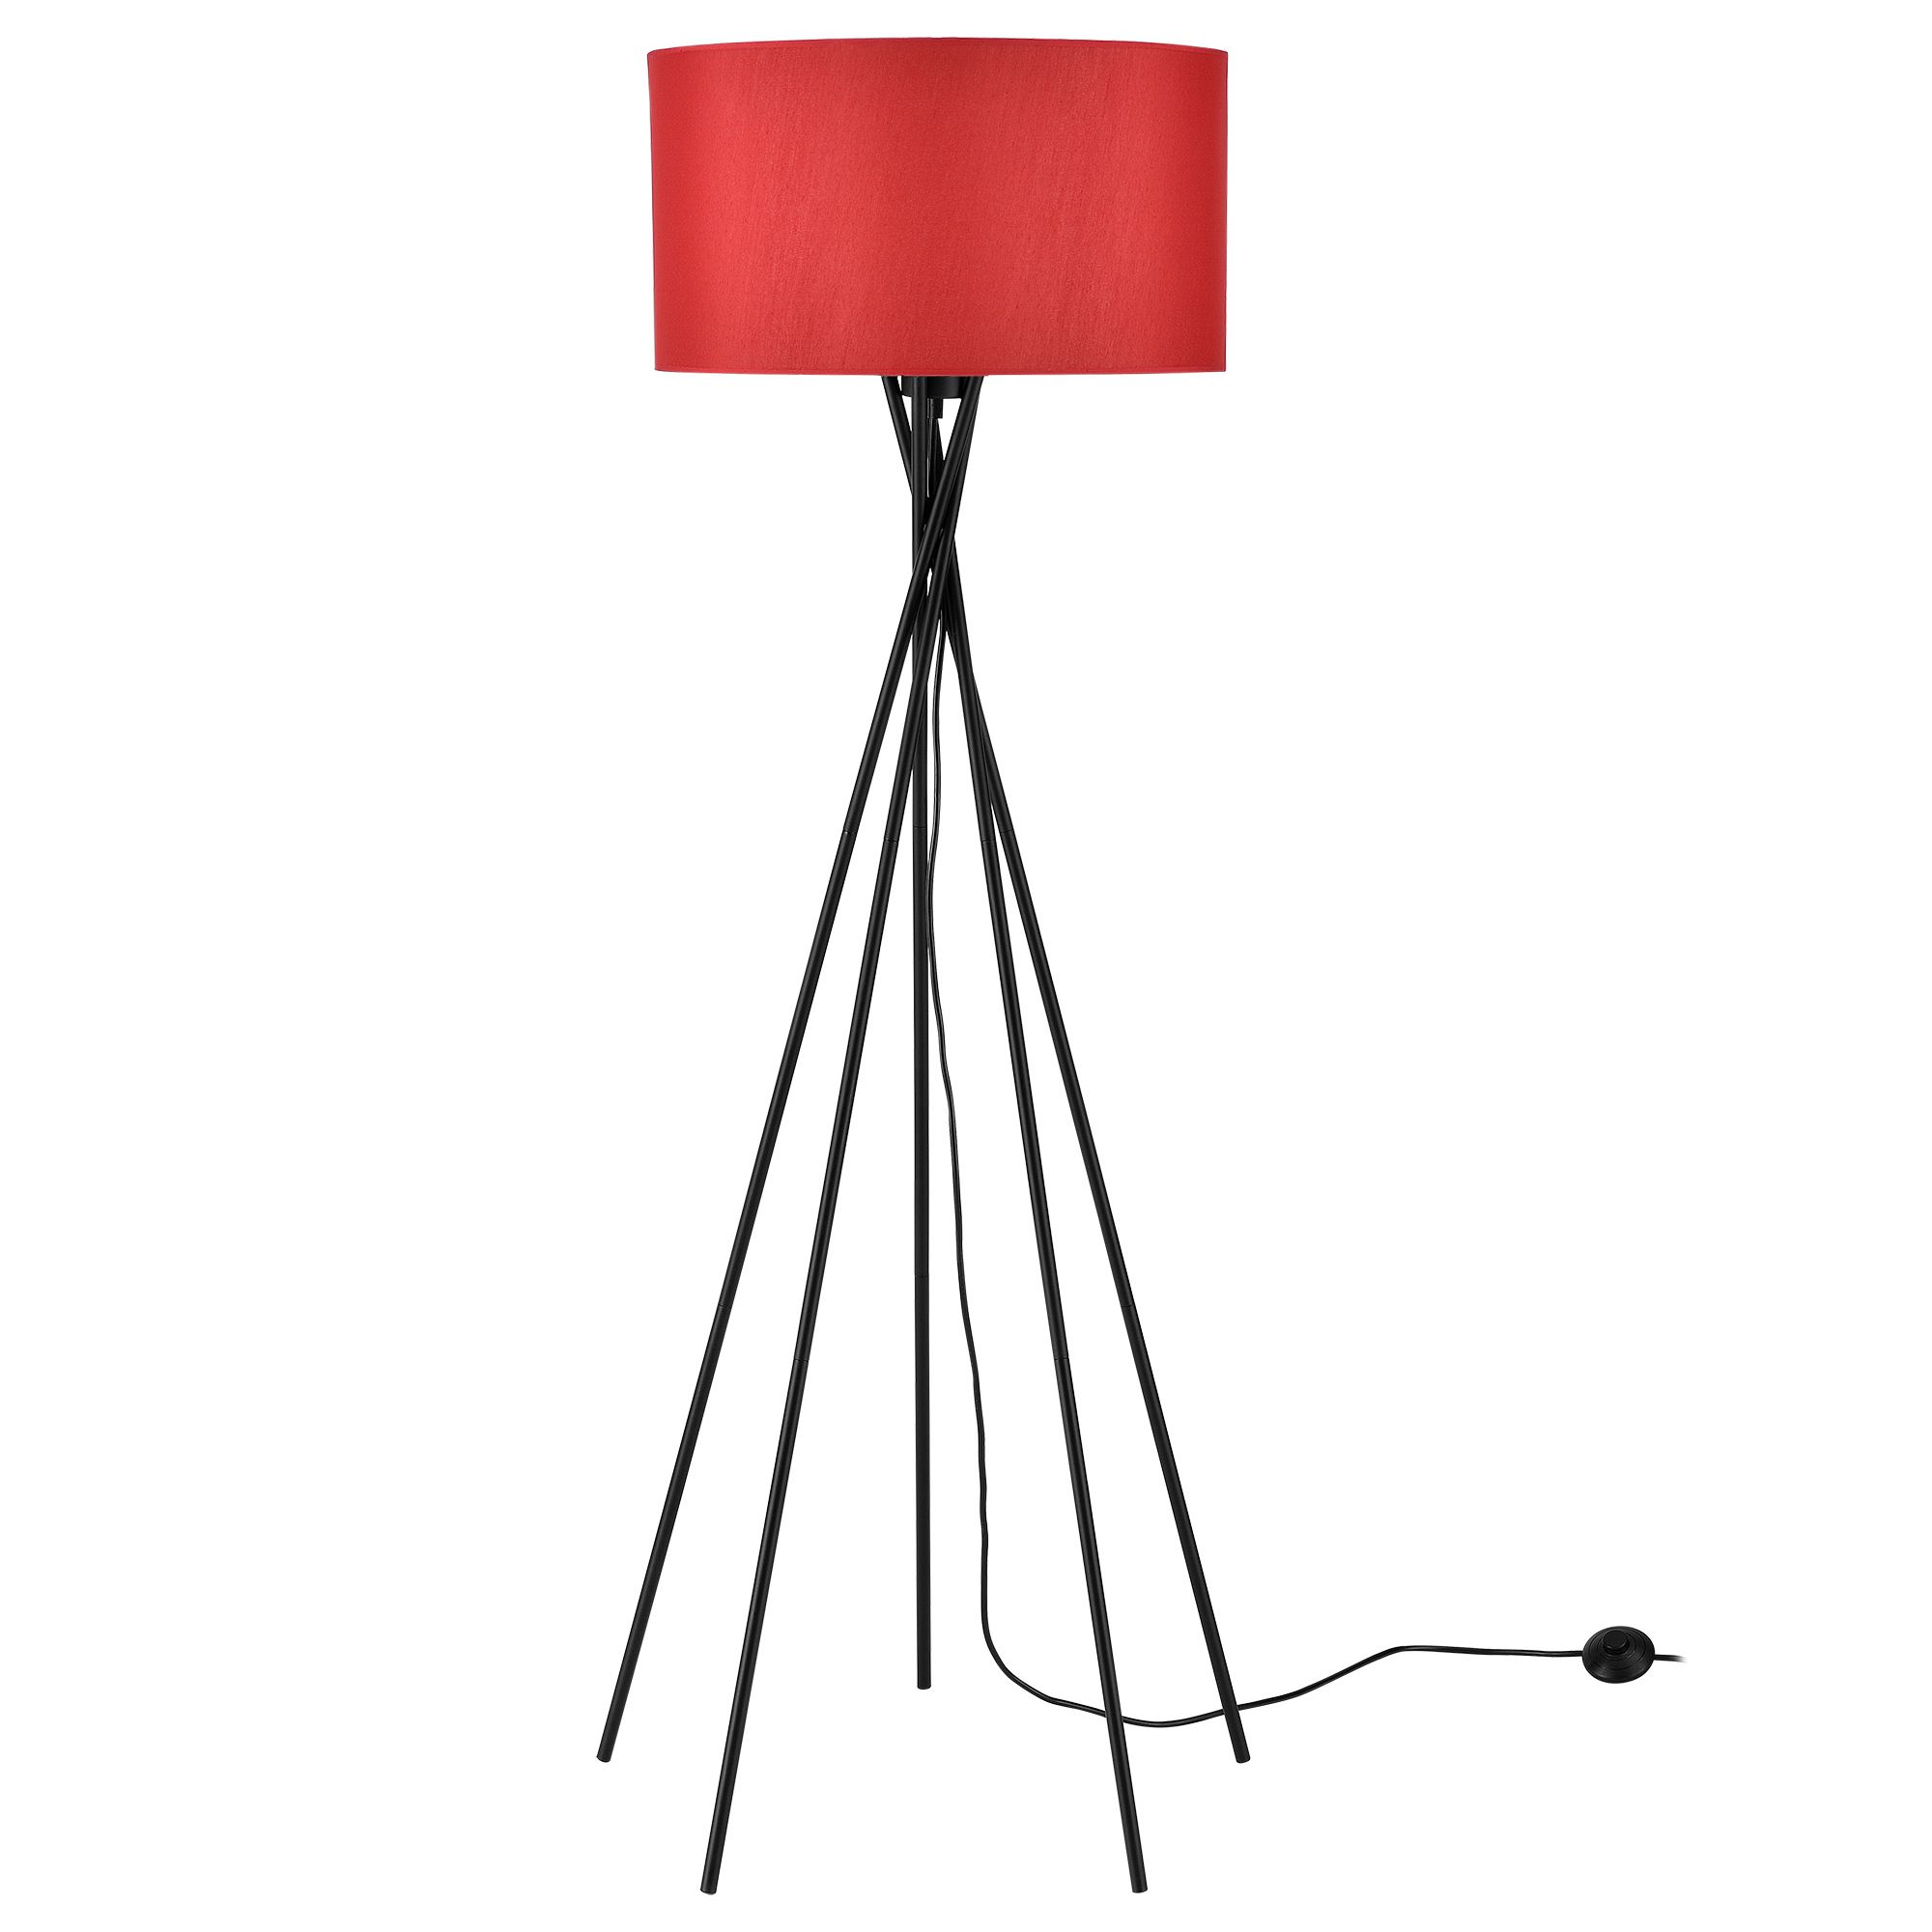 [lux.pro] Stojací lampa \"Red Mikado\" HT167494 - H.T. Trade Service GmbH & Co. KG